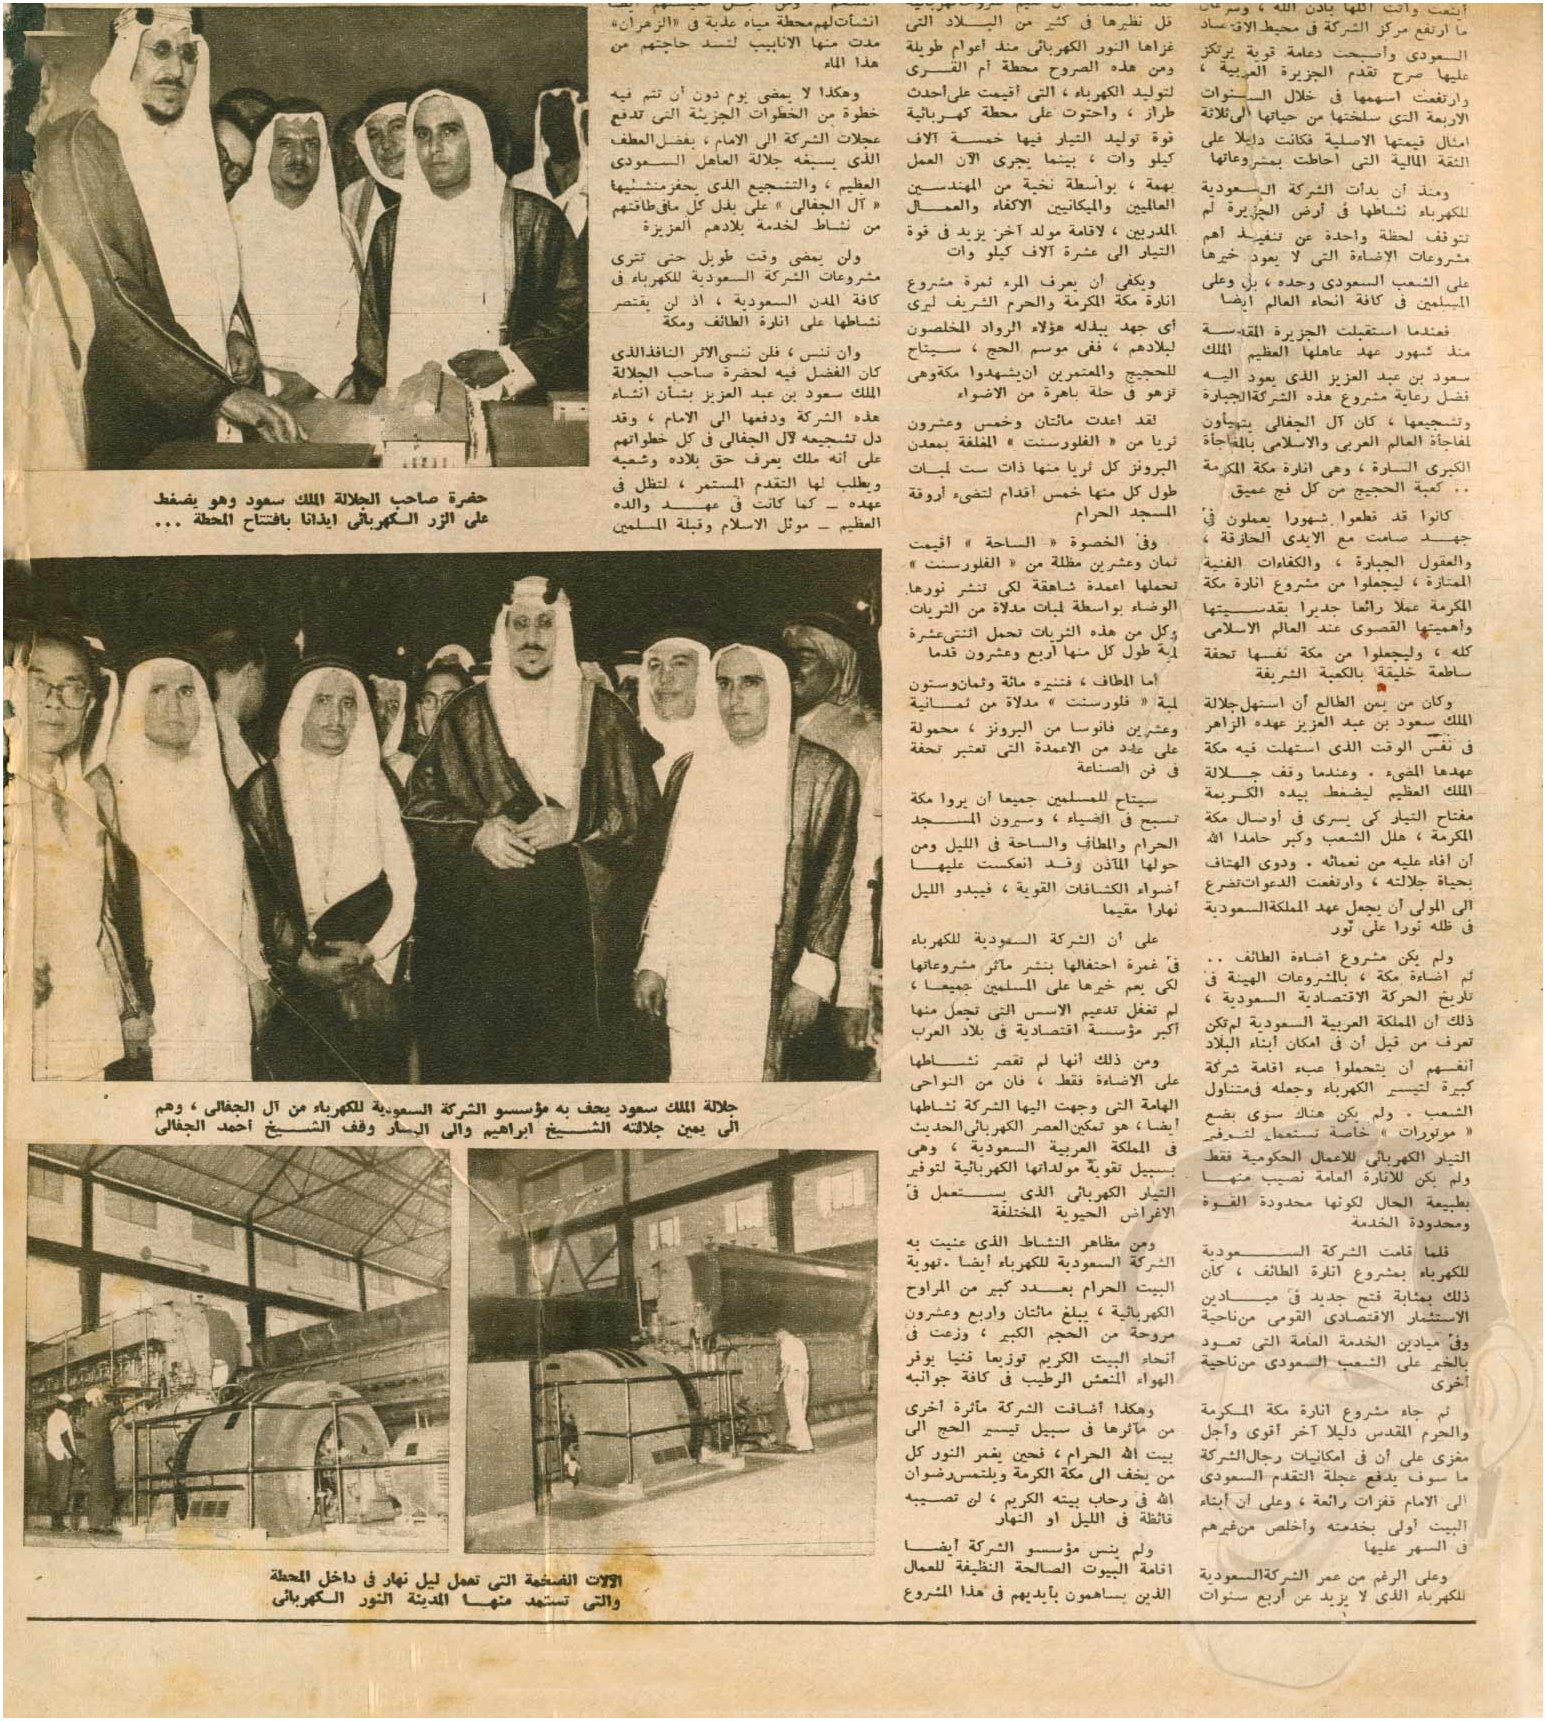 King Saud inaugurating the new electricity power station